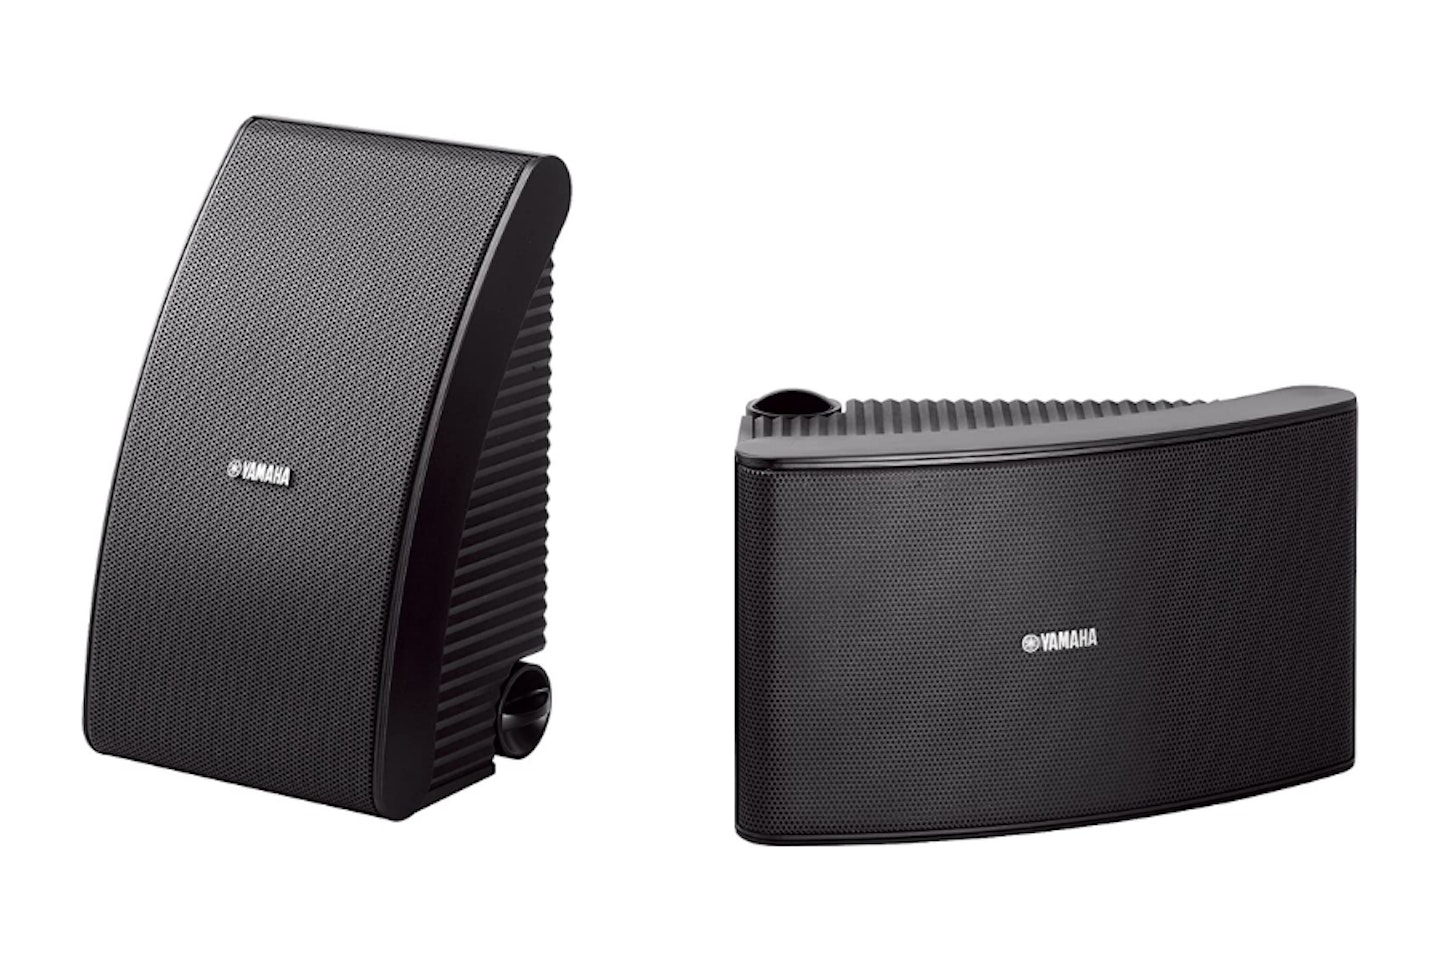 Yamaha NSAW592 All Weather Speakers